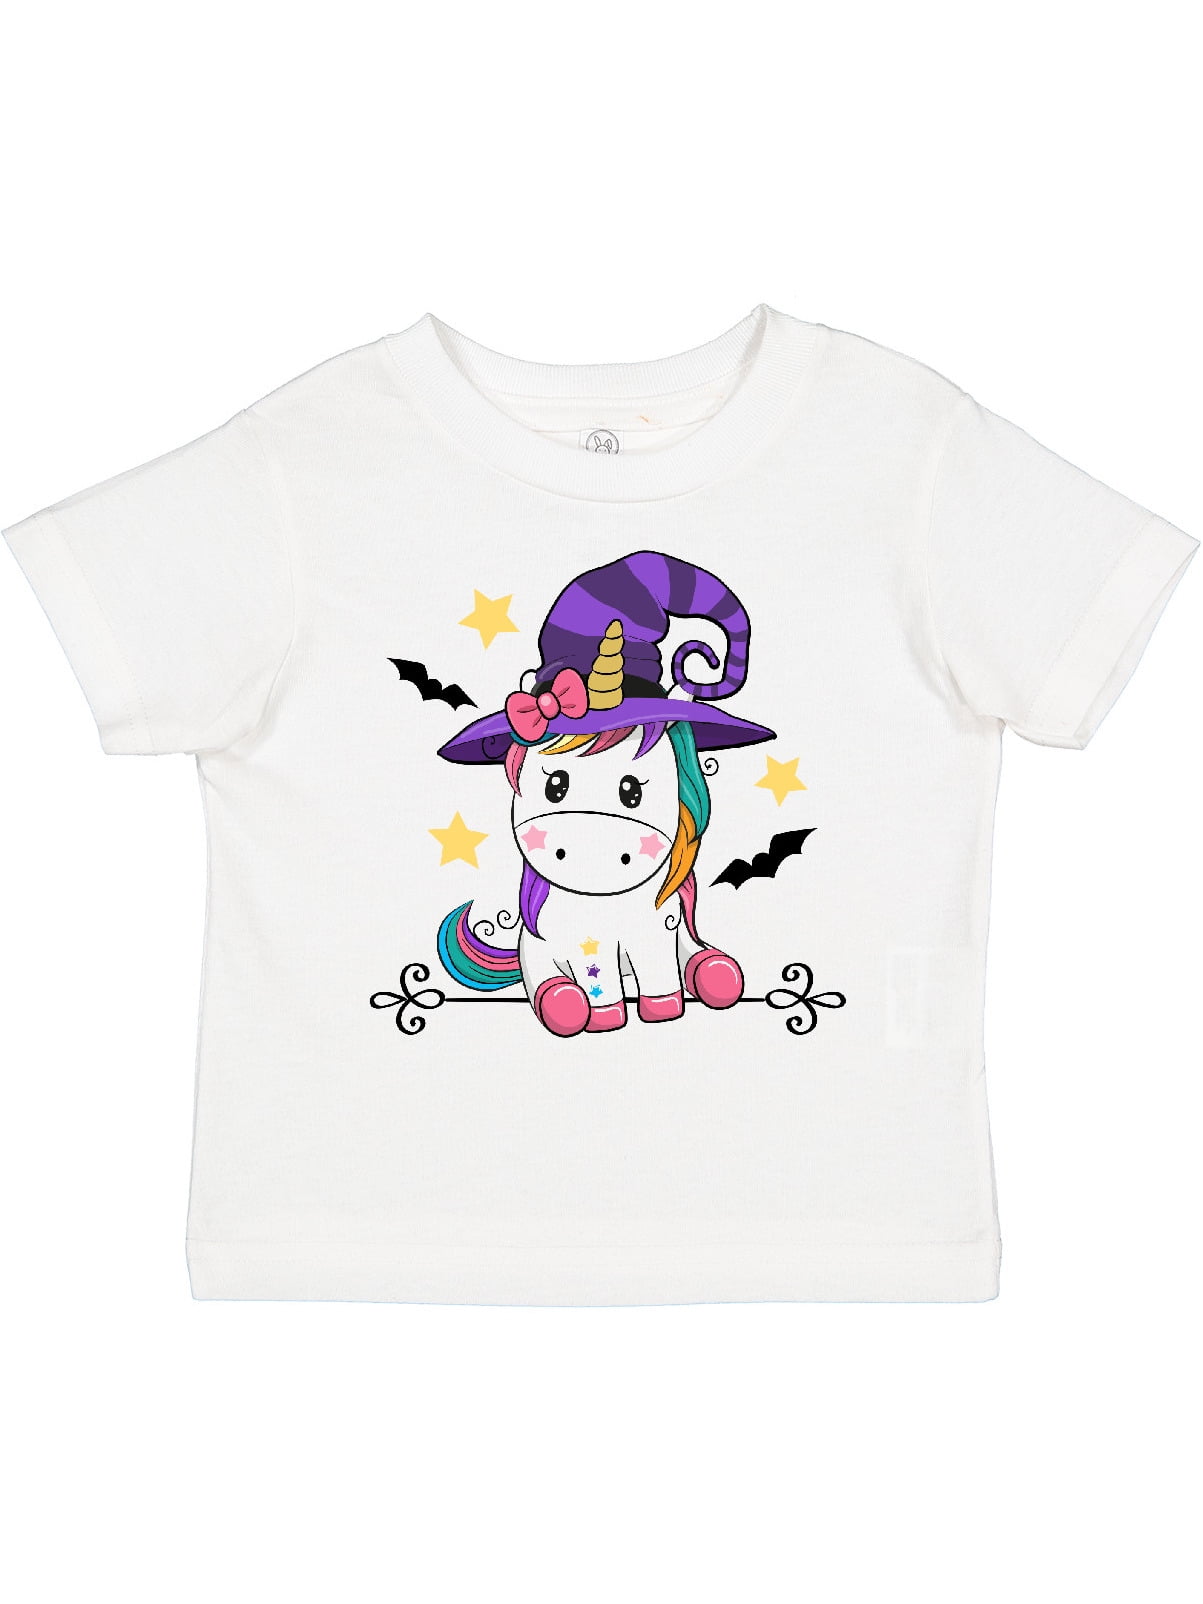 Happy Halloween Infant & Toddler Girls Pink Witch T-shirt Glittery Tee Shirt 